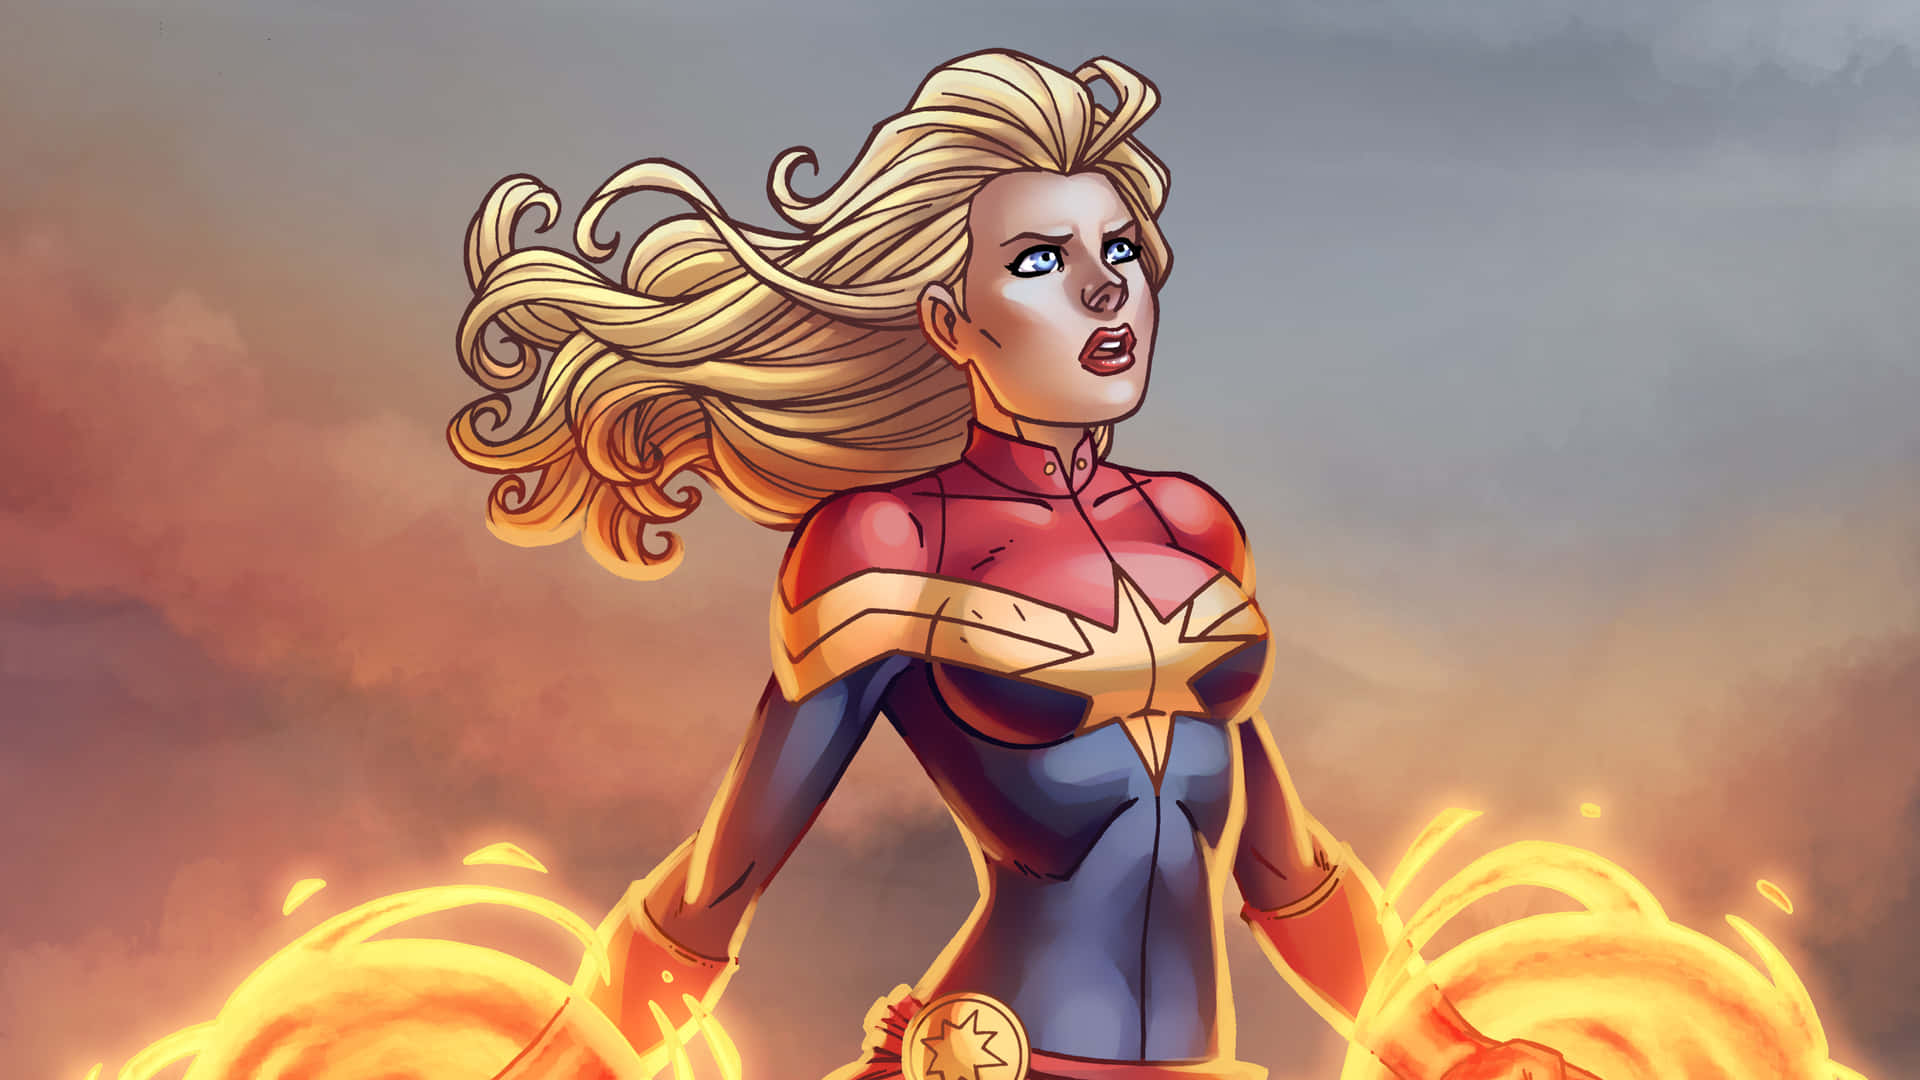 Equip yourself with the power of inspiration and stay connected with the new Captain Marvel iPad Wallpaper